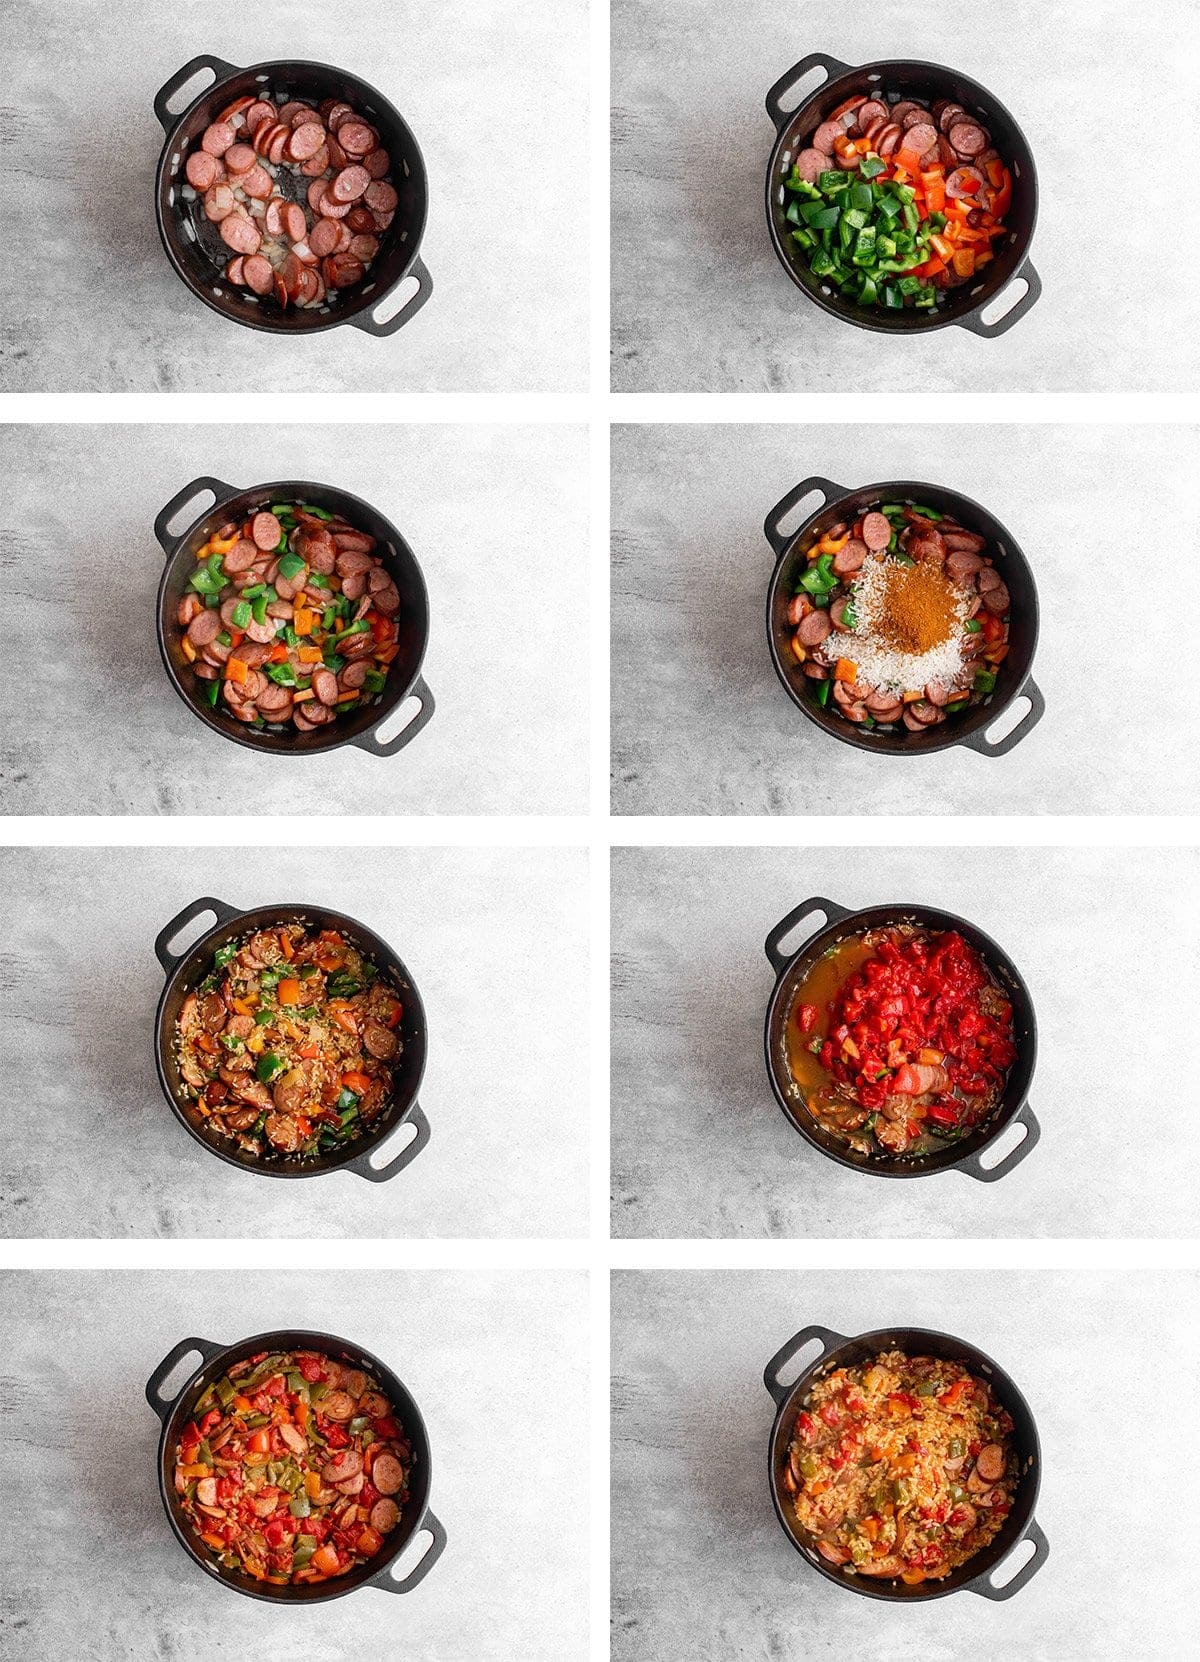 Collage of images showing the steps for making One Pot Cajun Sausage and Rice.